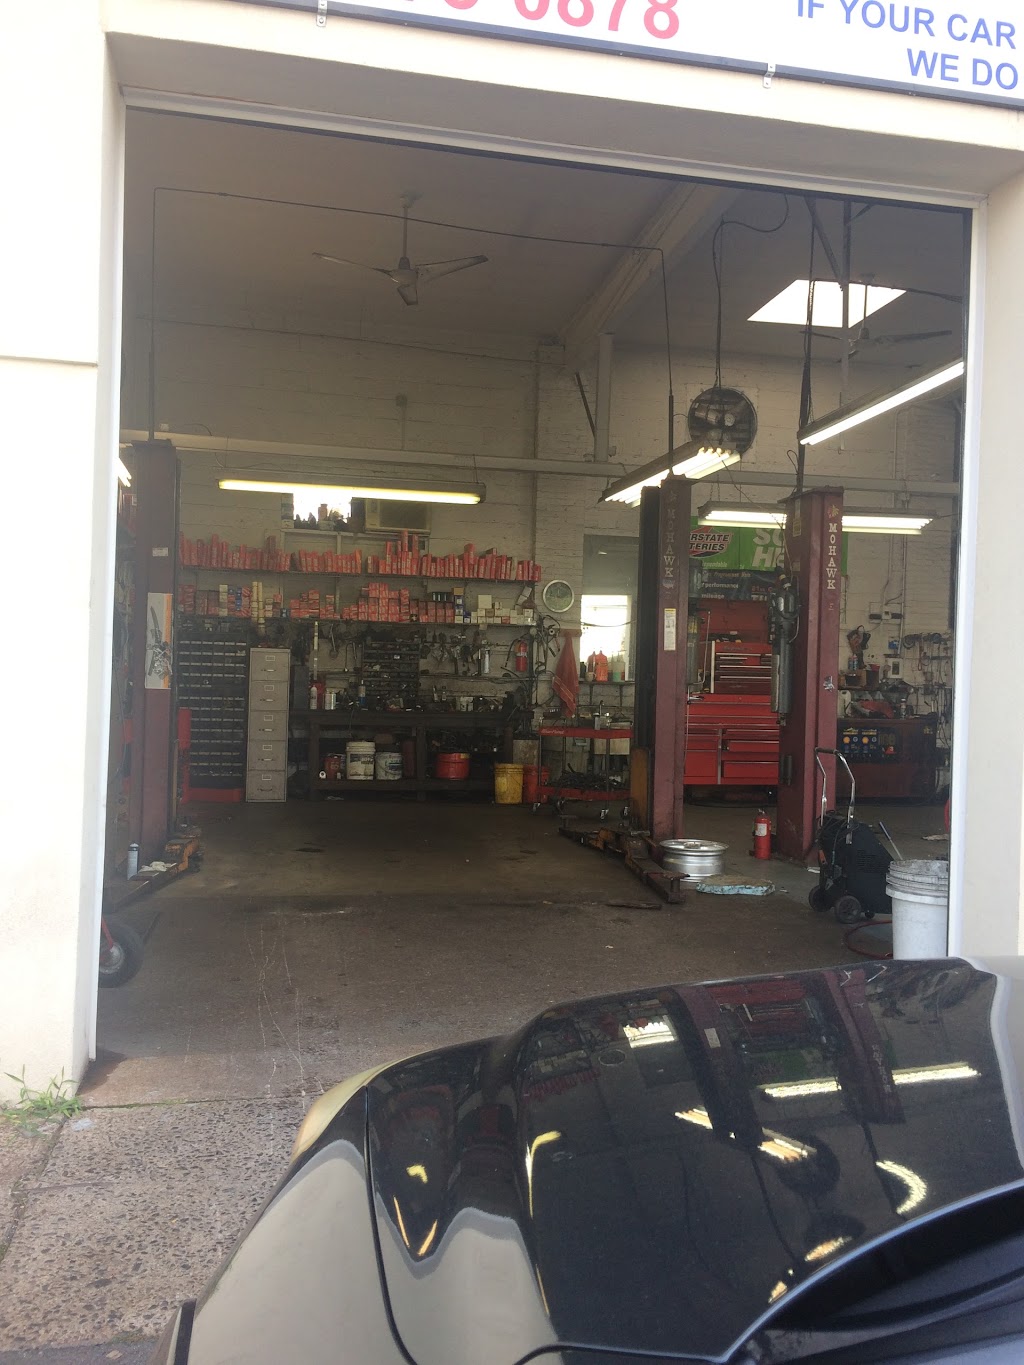 Lesters Auto Repair | 946 Paterson Ave, East Rutherford, NJ 07073 | Phone: (973) 473-0878